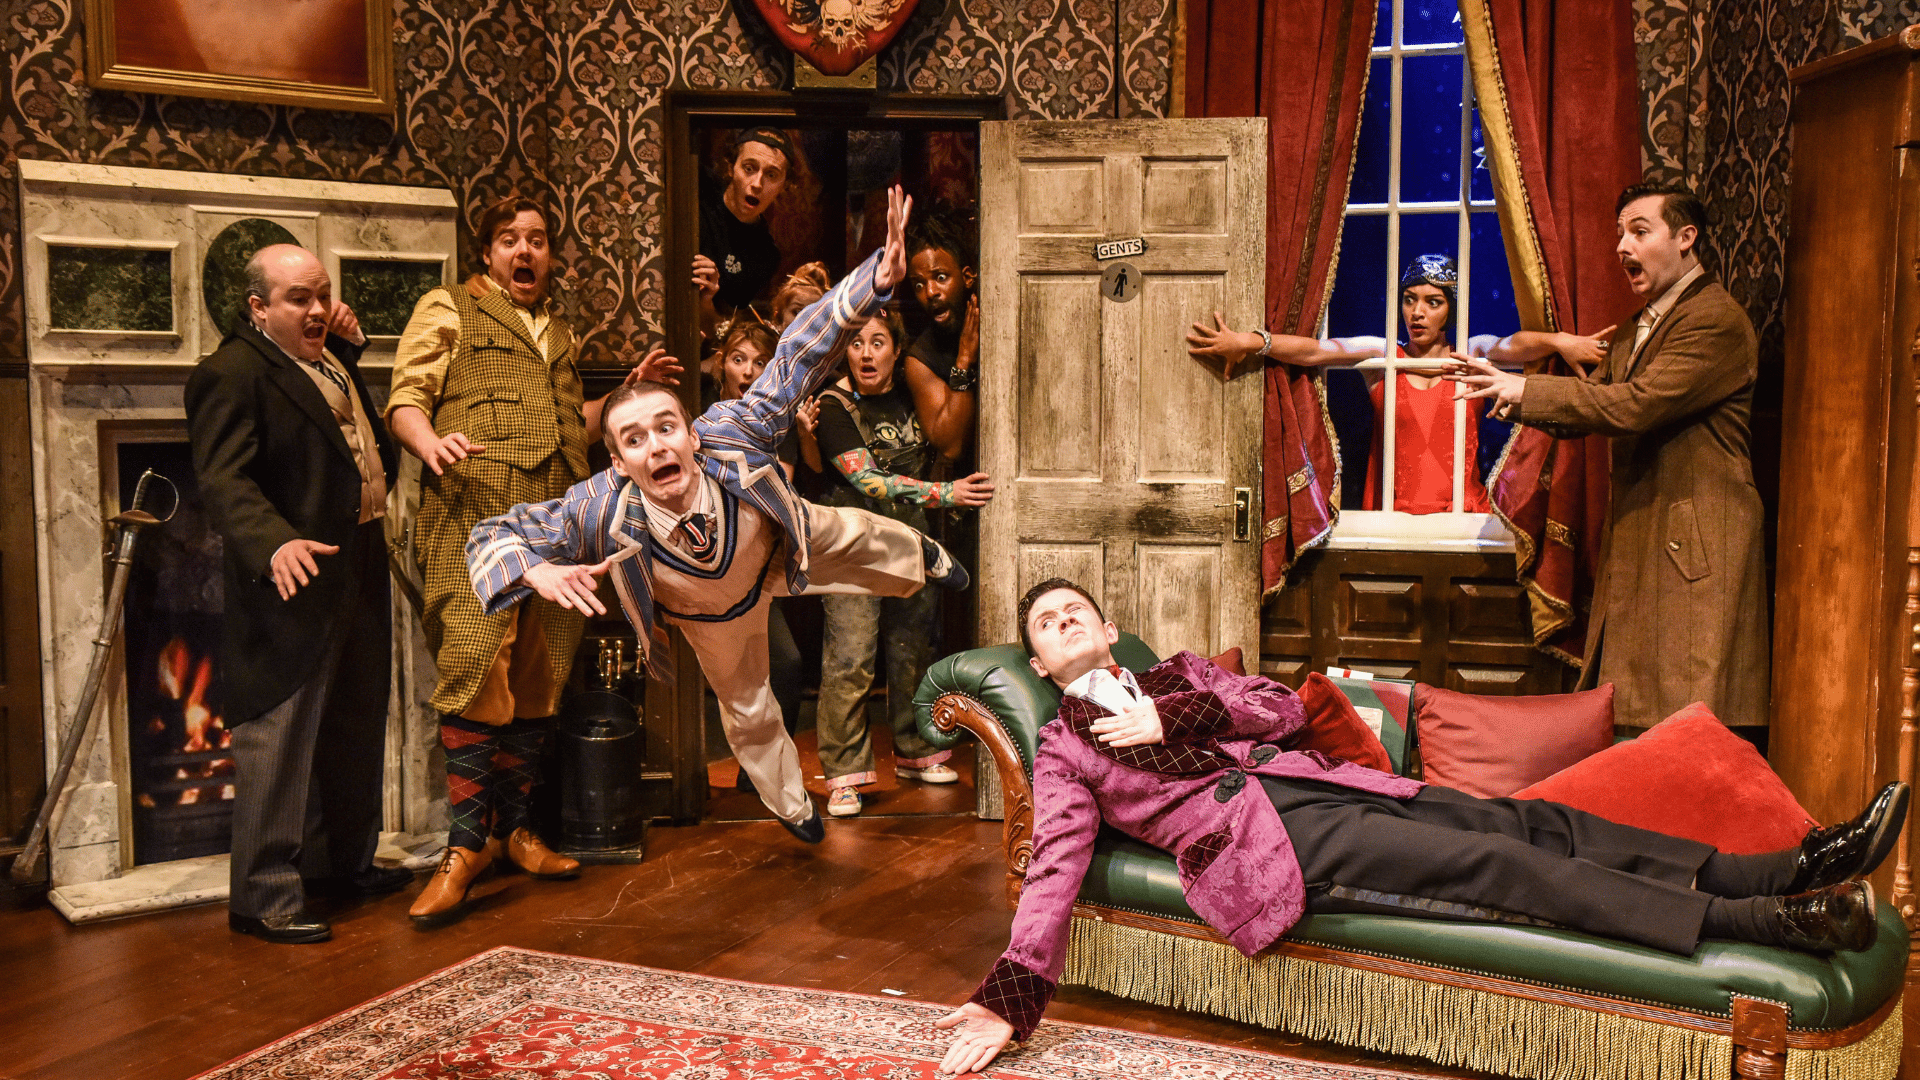 The Play That Goes Wrong Production Shot: Jonathan (Seán Carey) is laid down on a chaise longue with one eye open. Max (Tom Babbage) has burst into the scene falling through a door. Everyone else (9 cast members) are towards the back of the scene and looking scared as Max is falling.